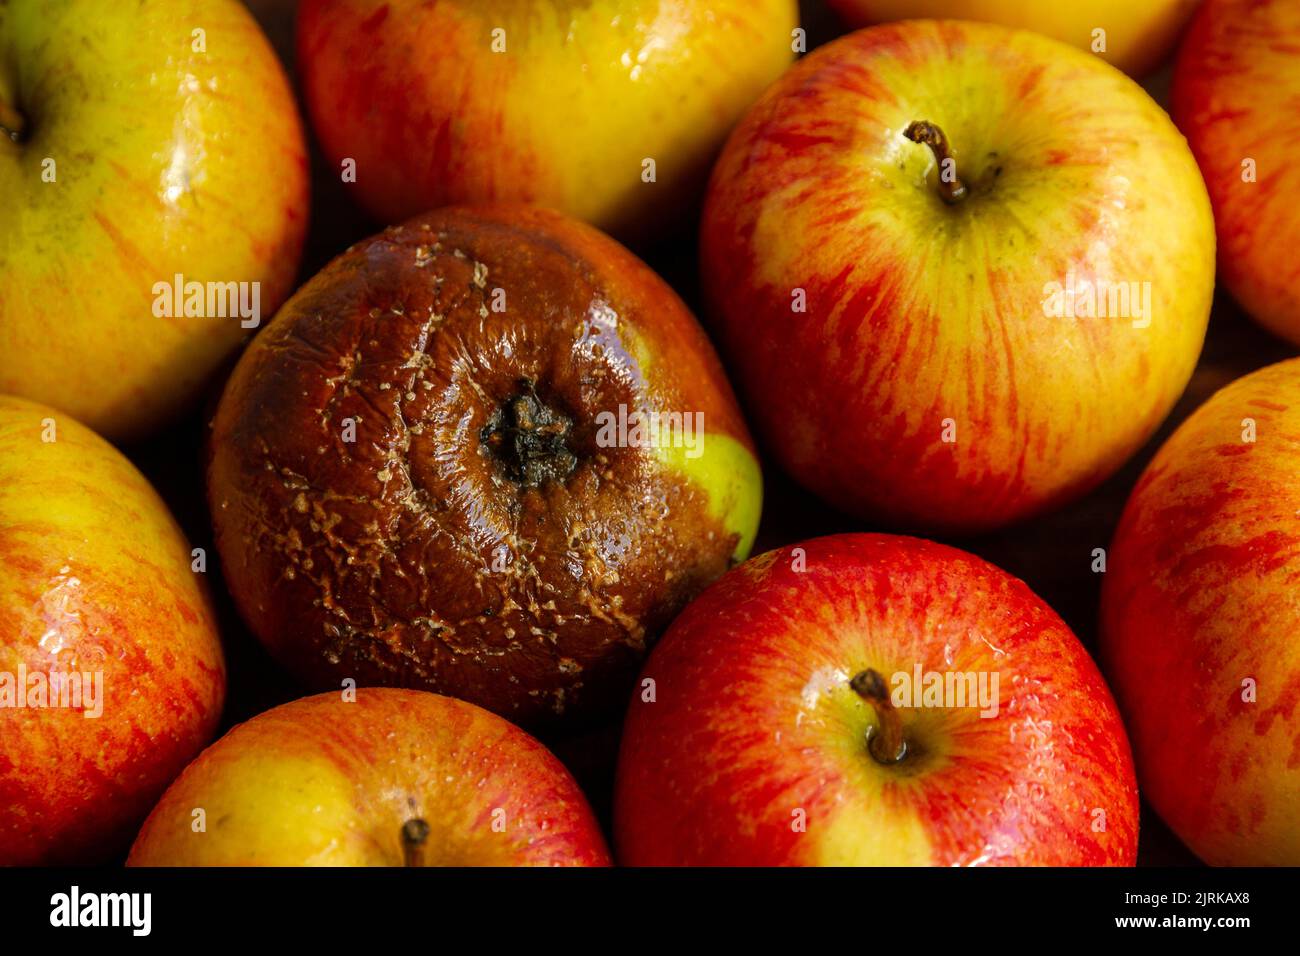 one bad apple nestling close to other good apples, possibly infecting the other apples Stock Photo